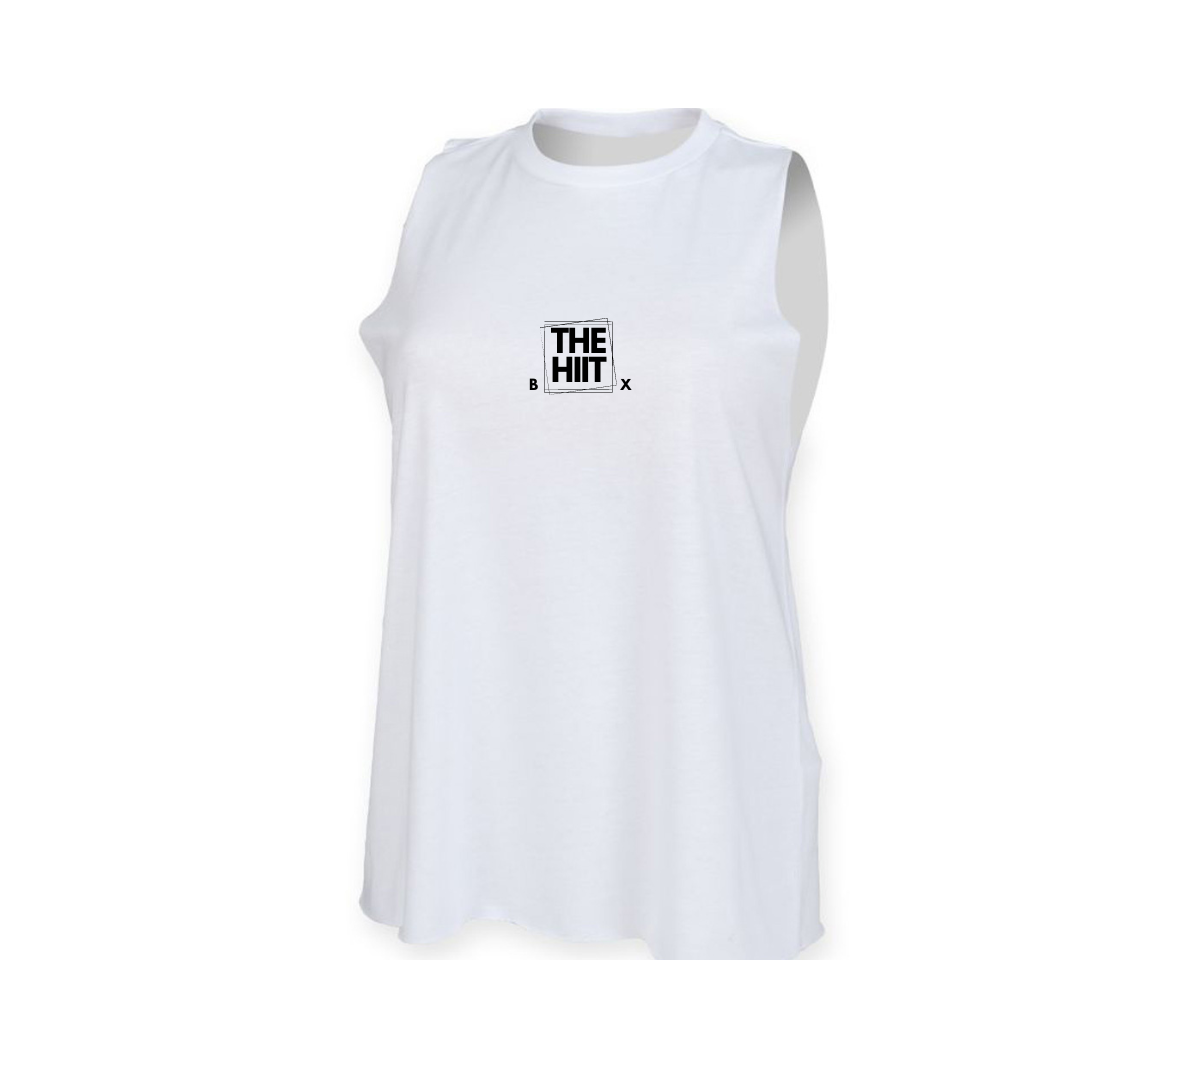 Limited Edition - The HIIT Box Women's Tank Top